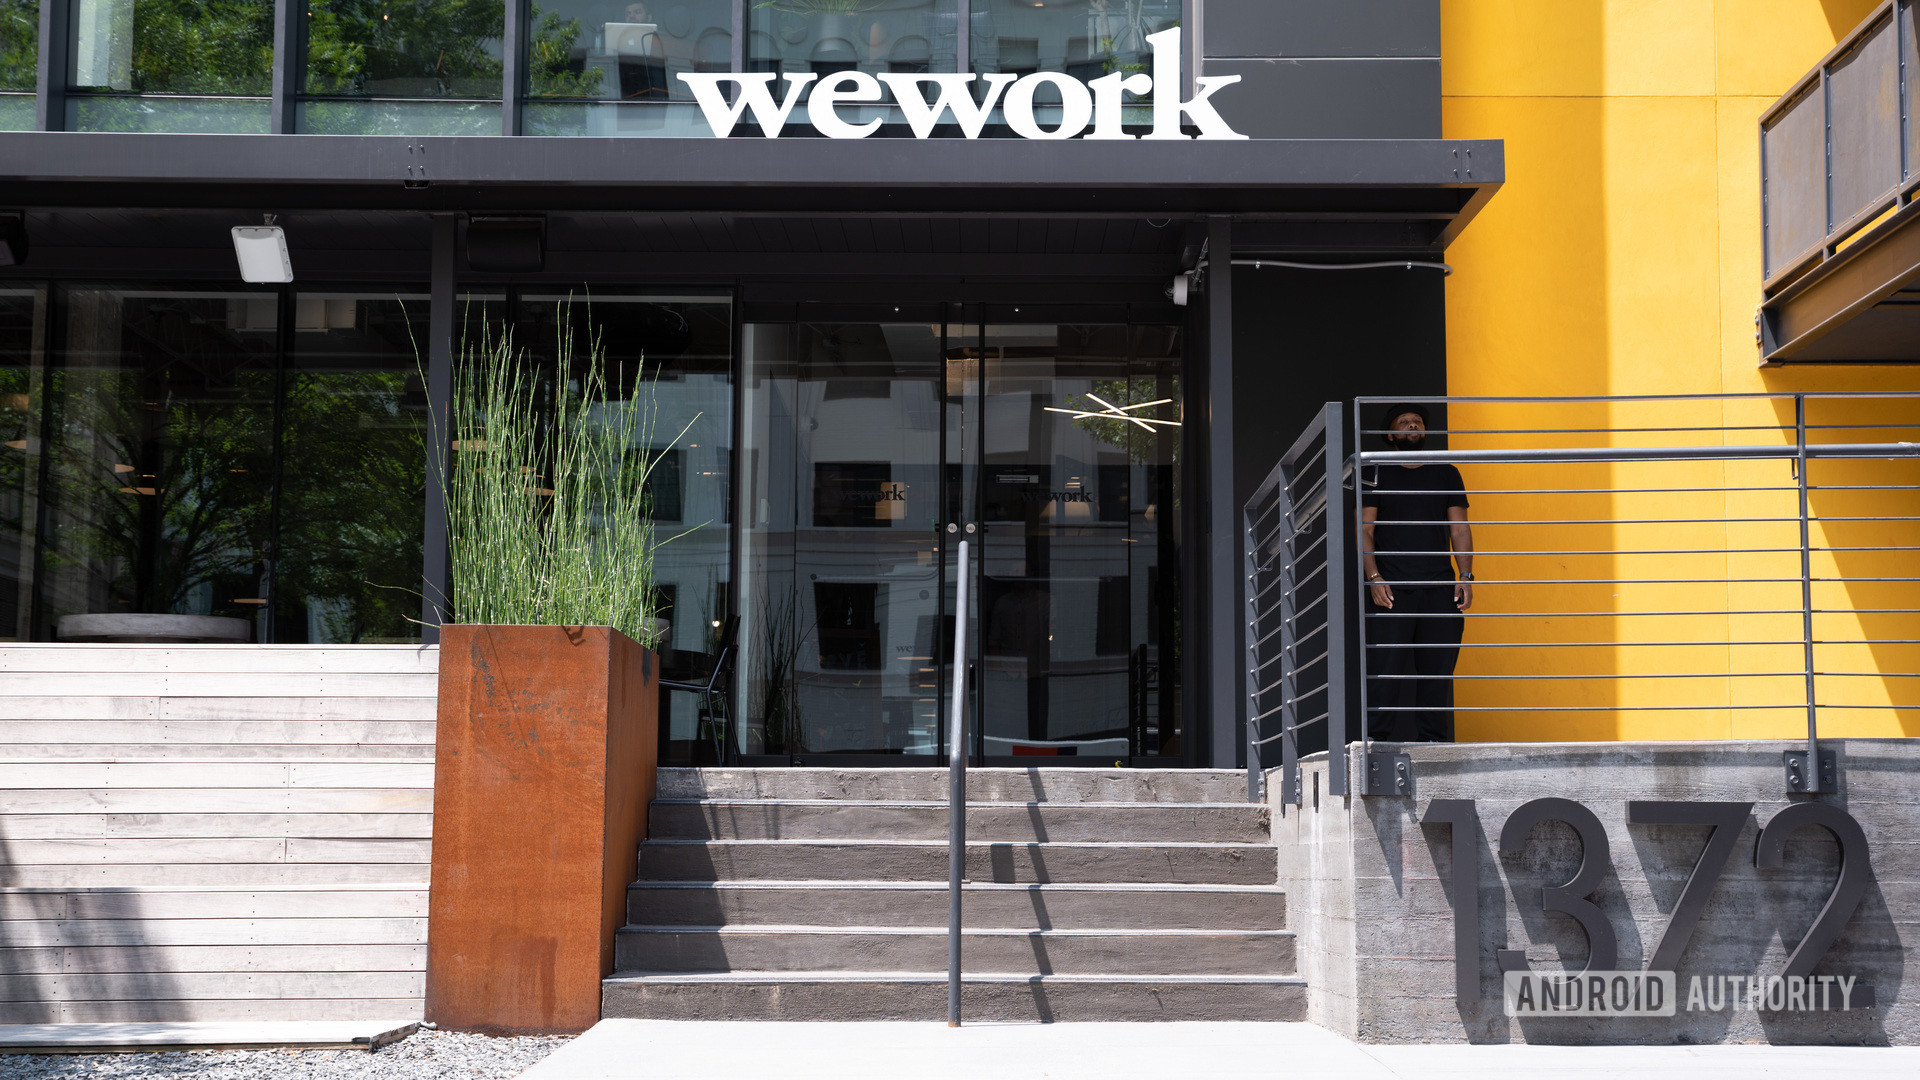 The outside entrance to WeWork.